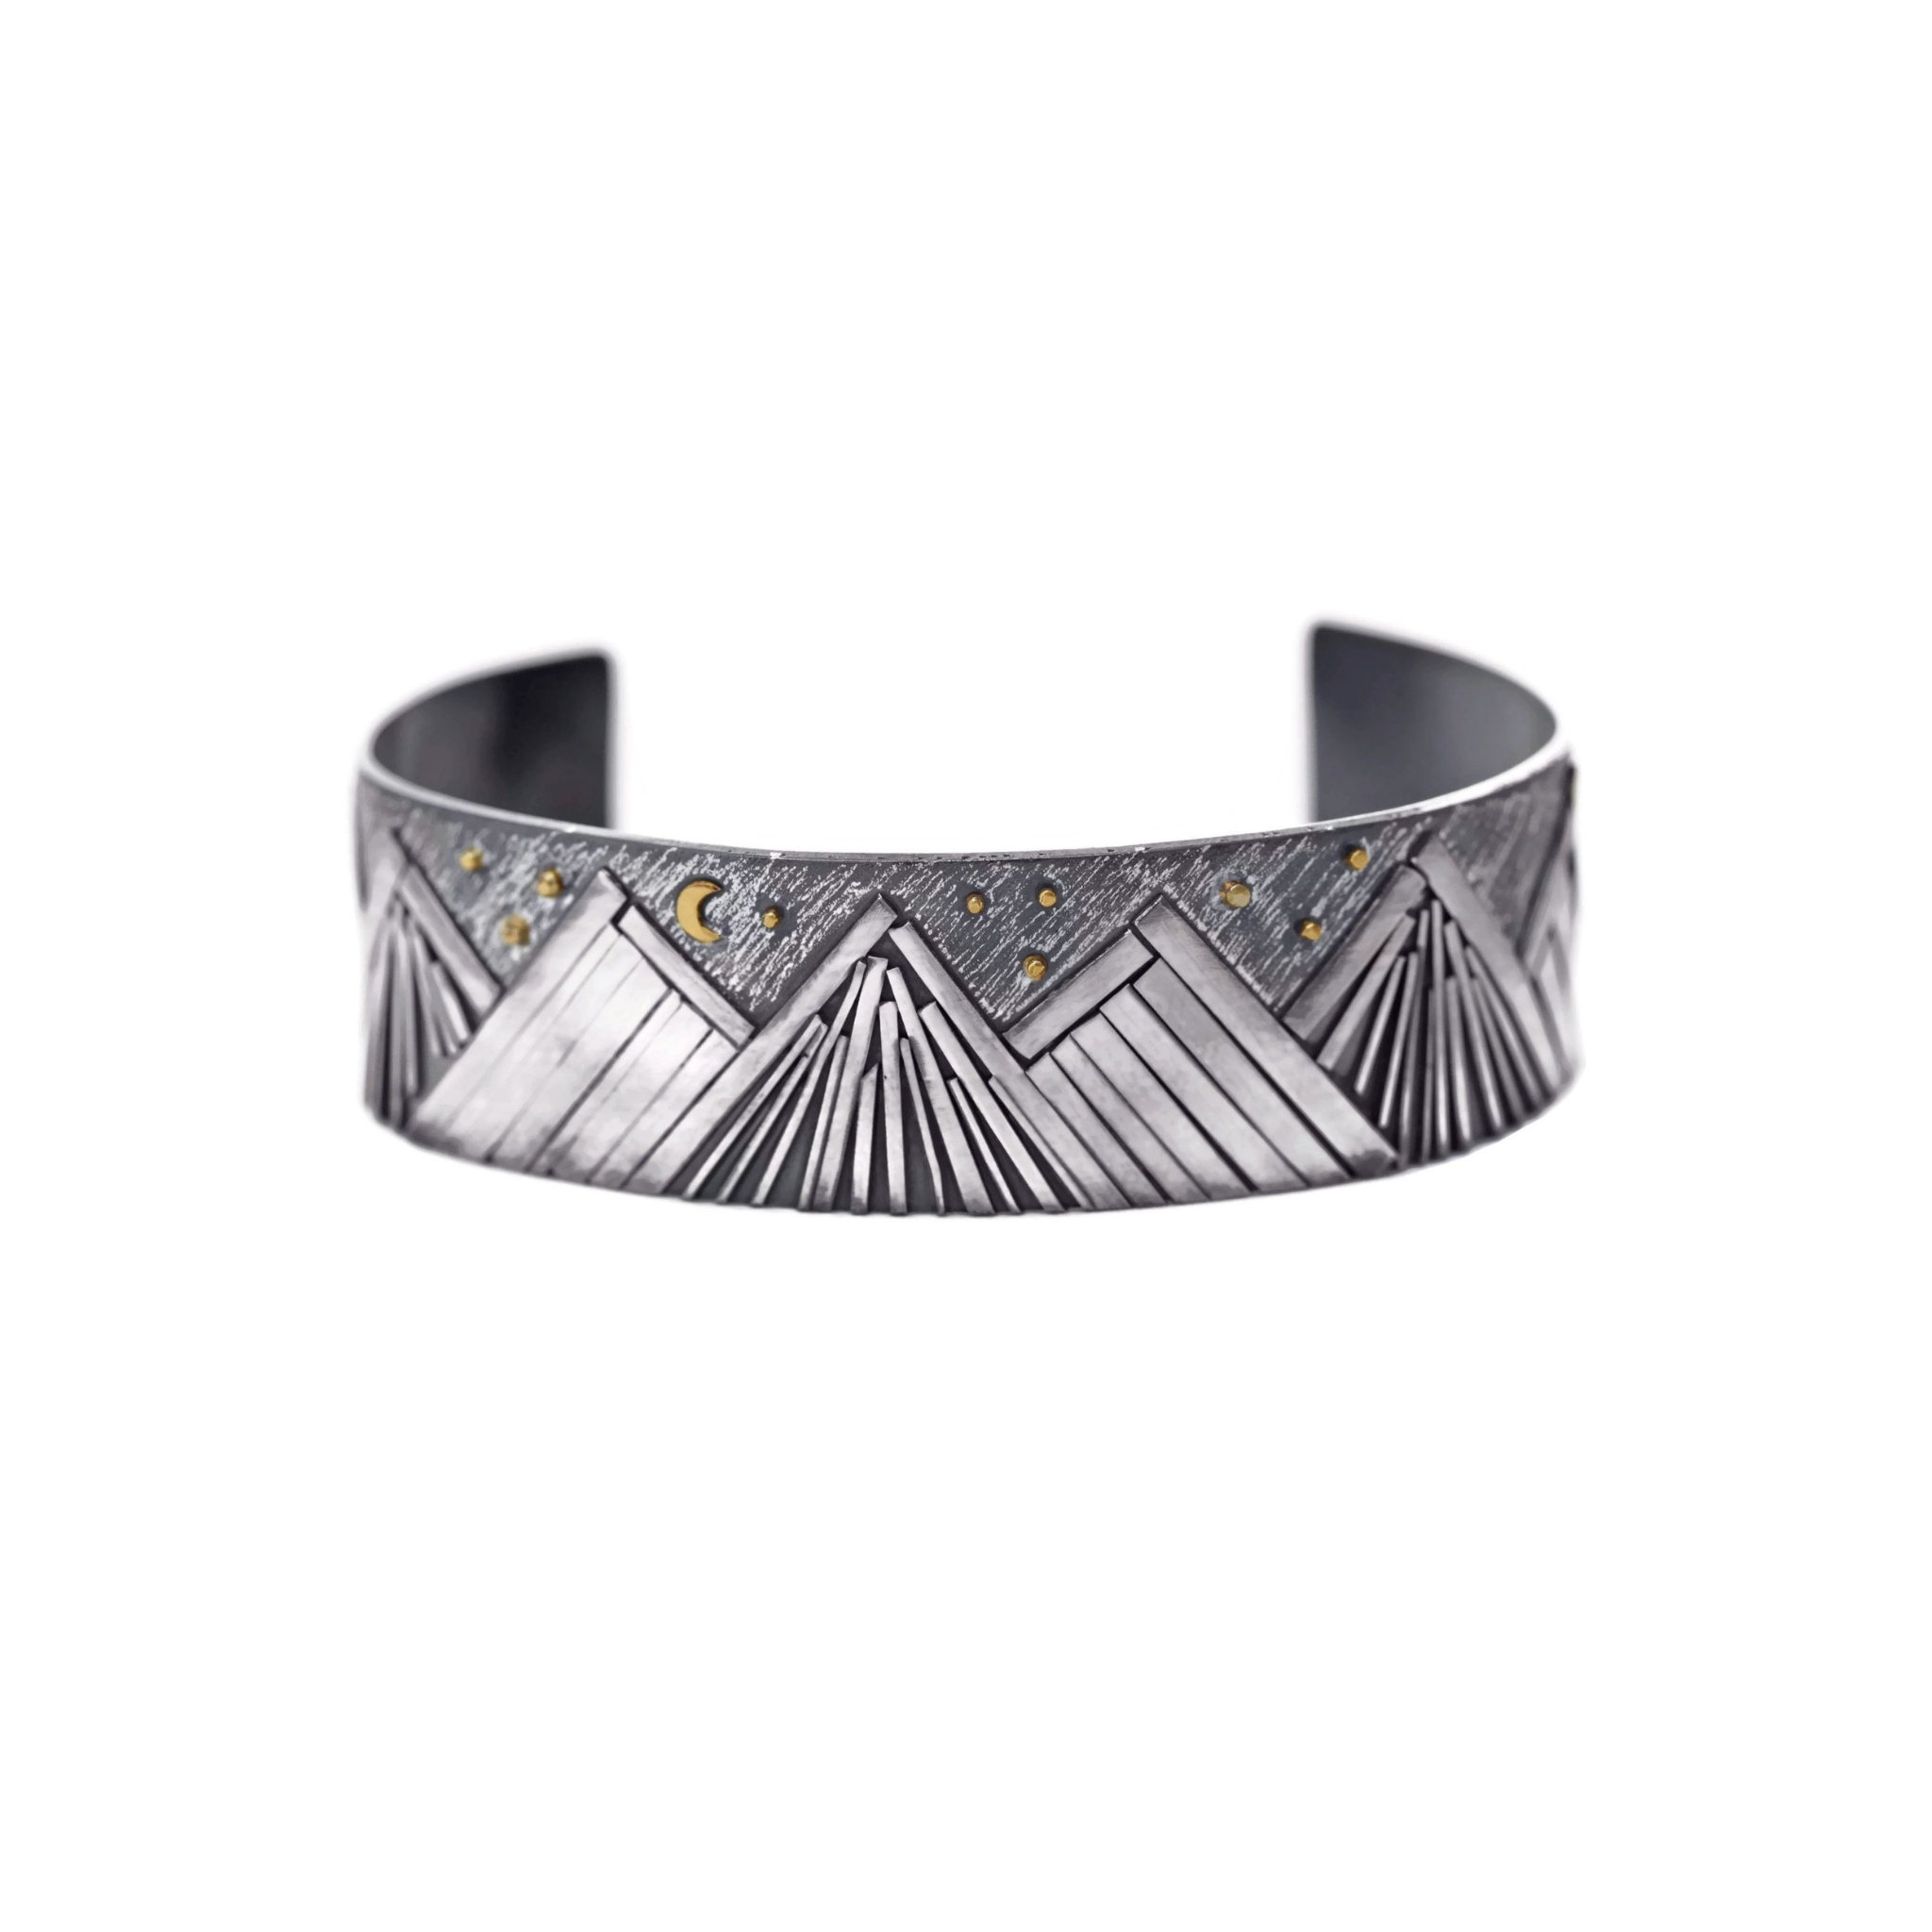 Handmade Bright Moon Mountain 22K and Oxidized Sterling Silver Cuff Bracelet